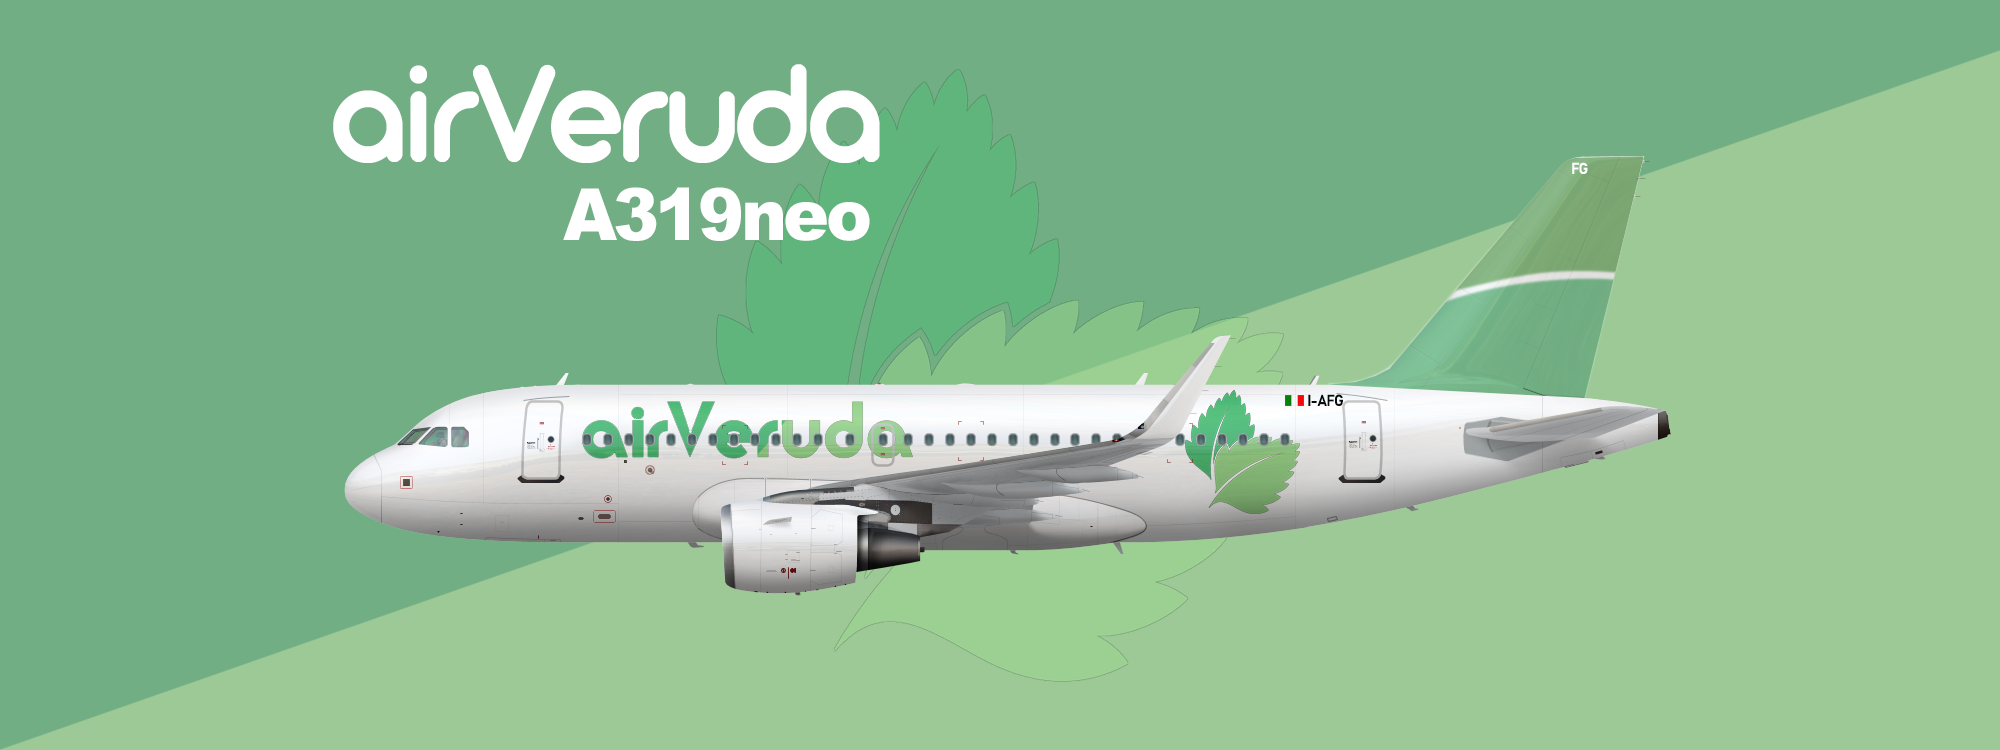 [OLD] airVeruda A319neo | I-AFG